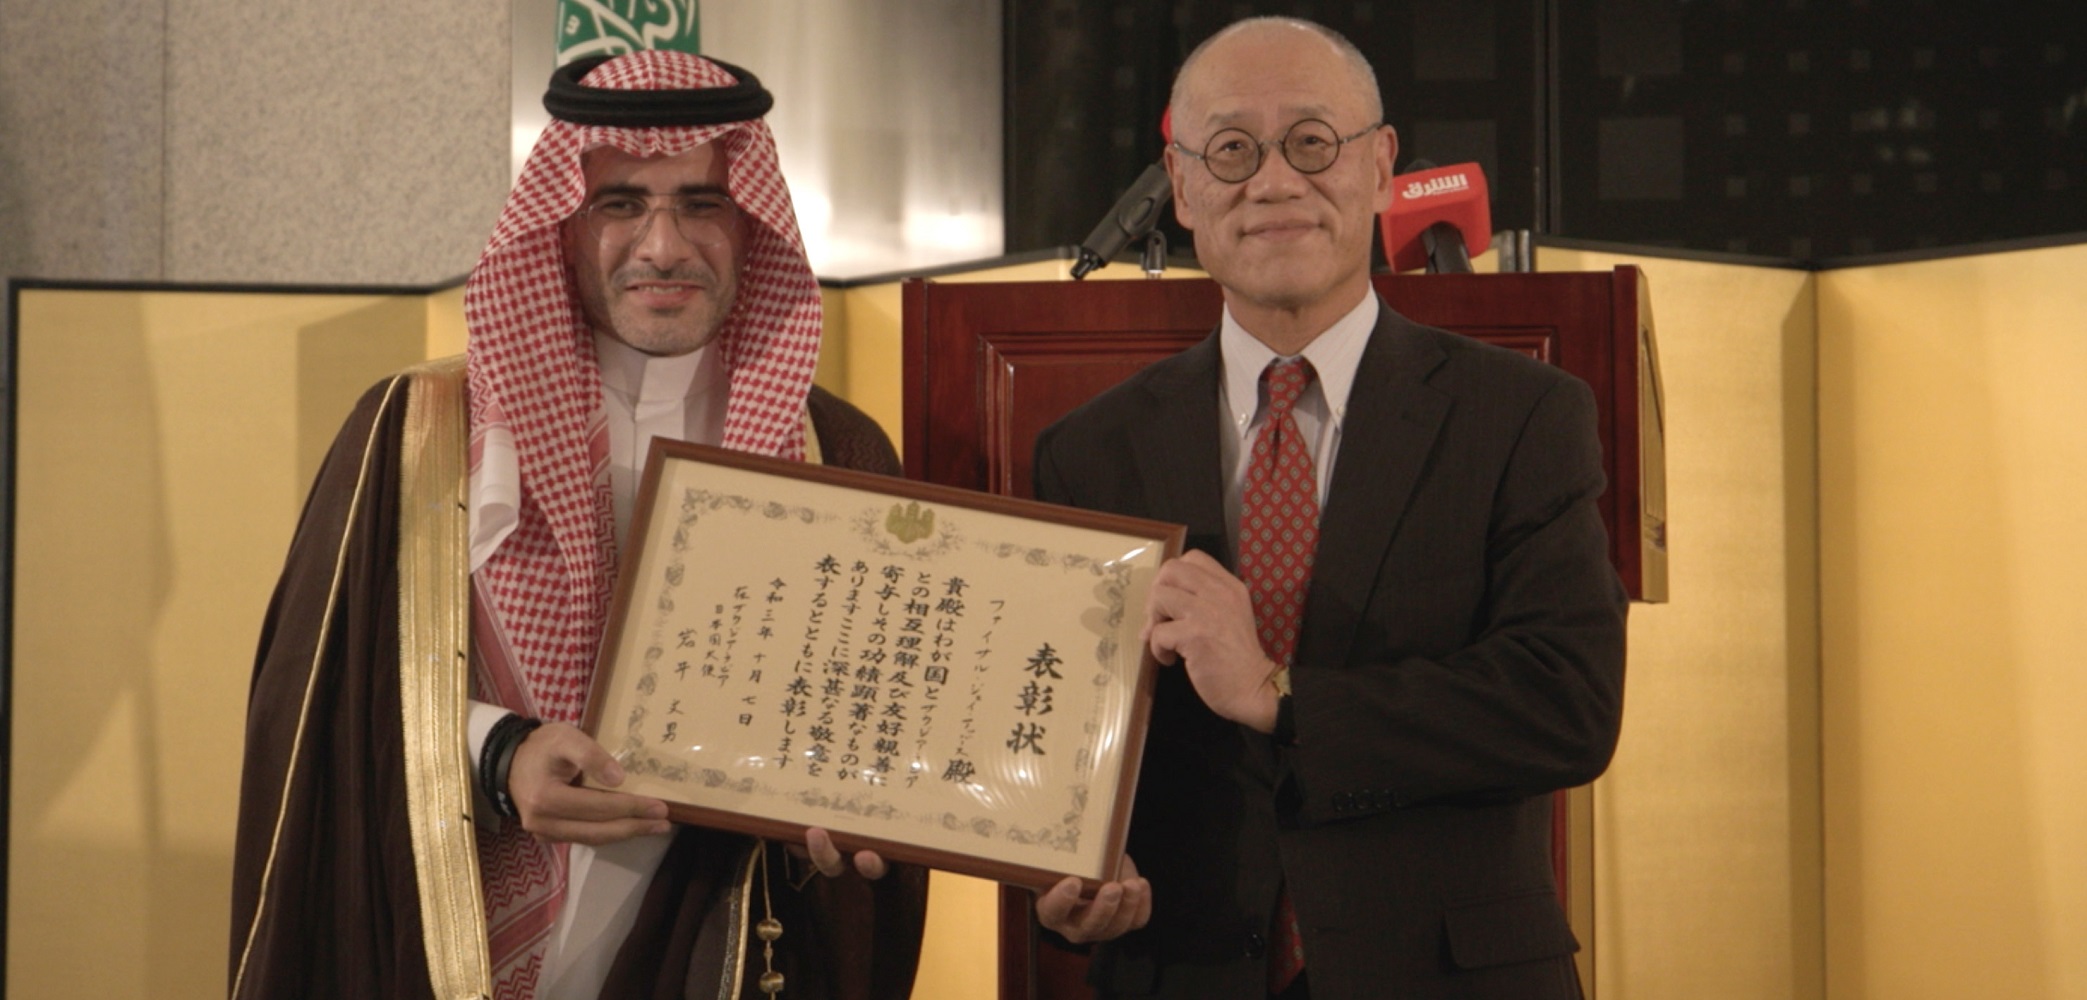 Ambassador of Japan Celebrates Commendation for Faisal J. Abbas, Editor-in-Chief of Arab News.